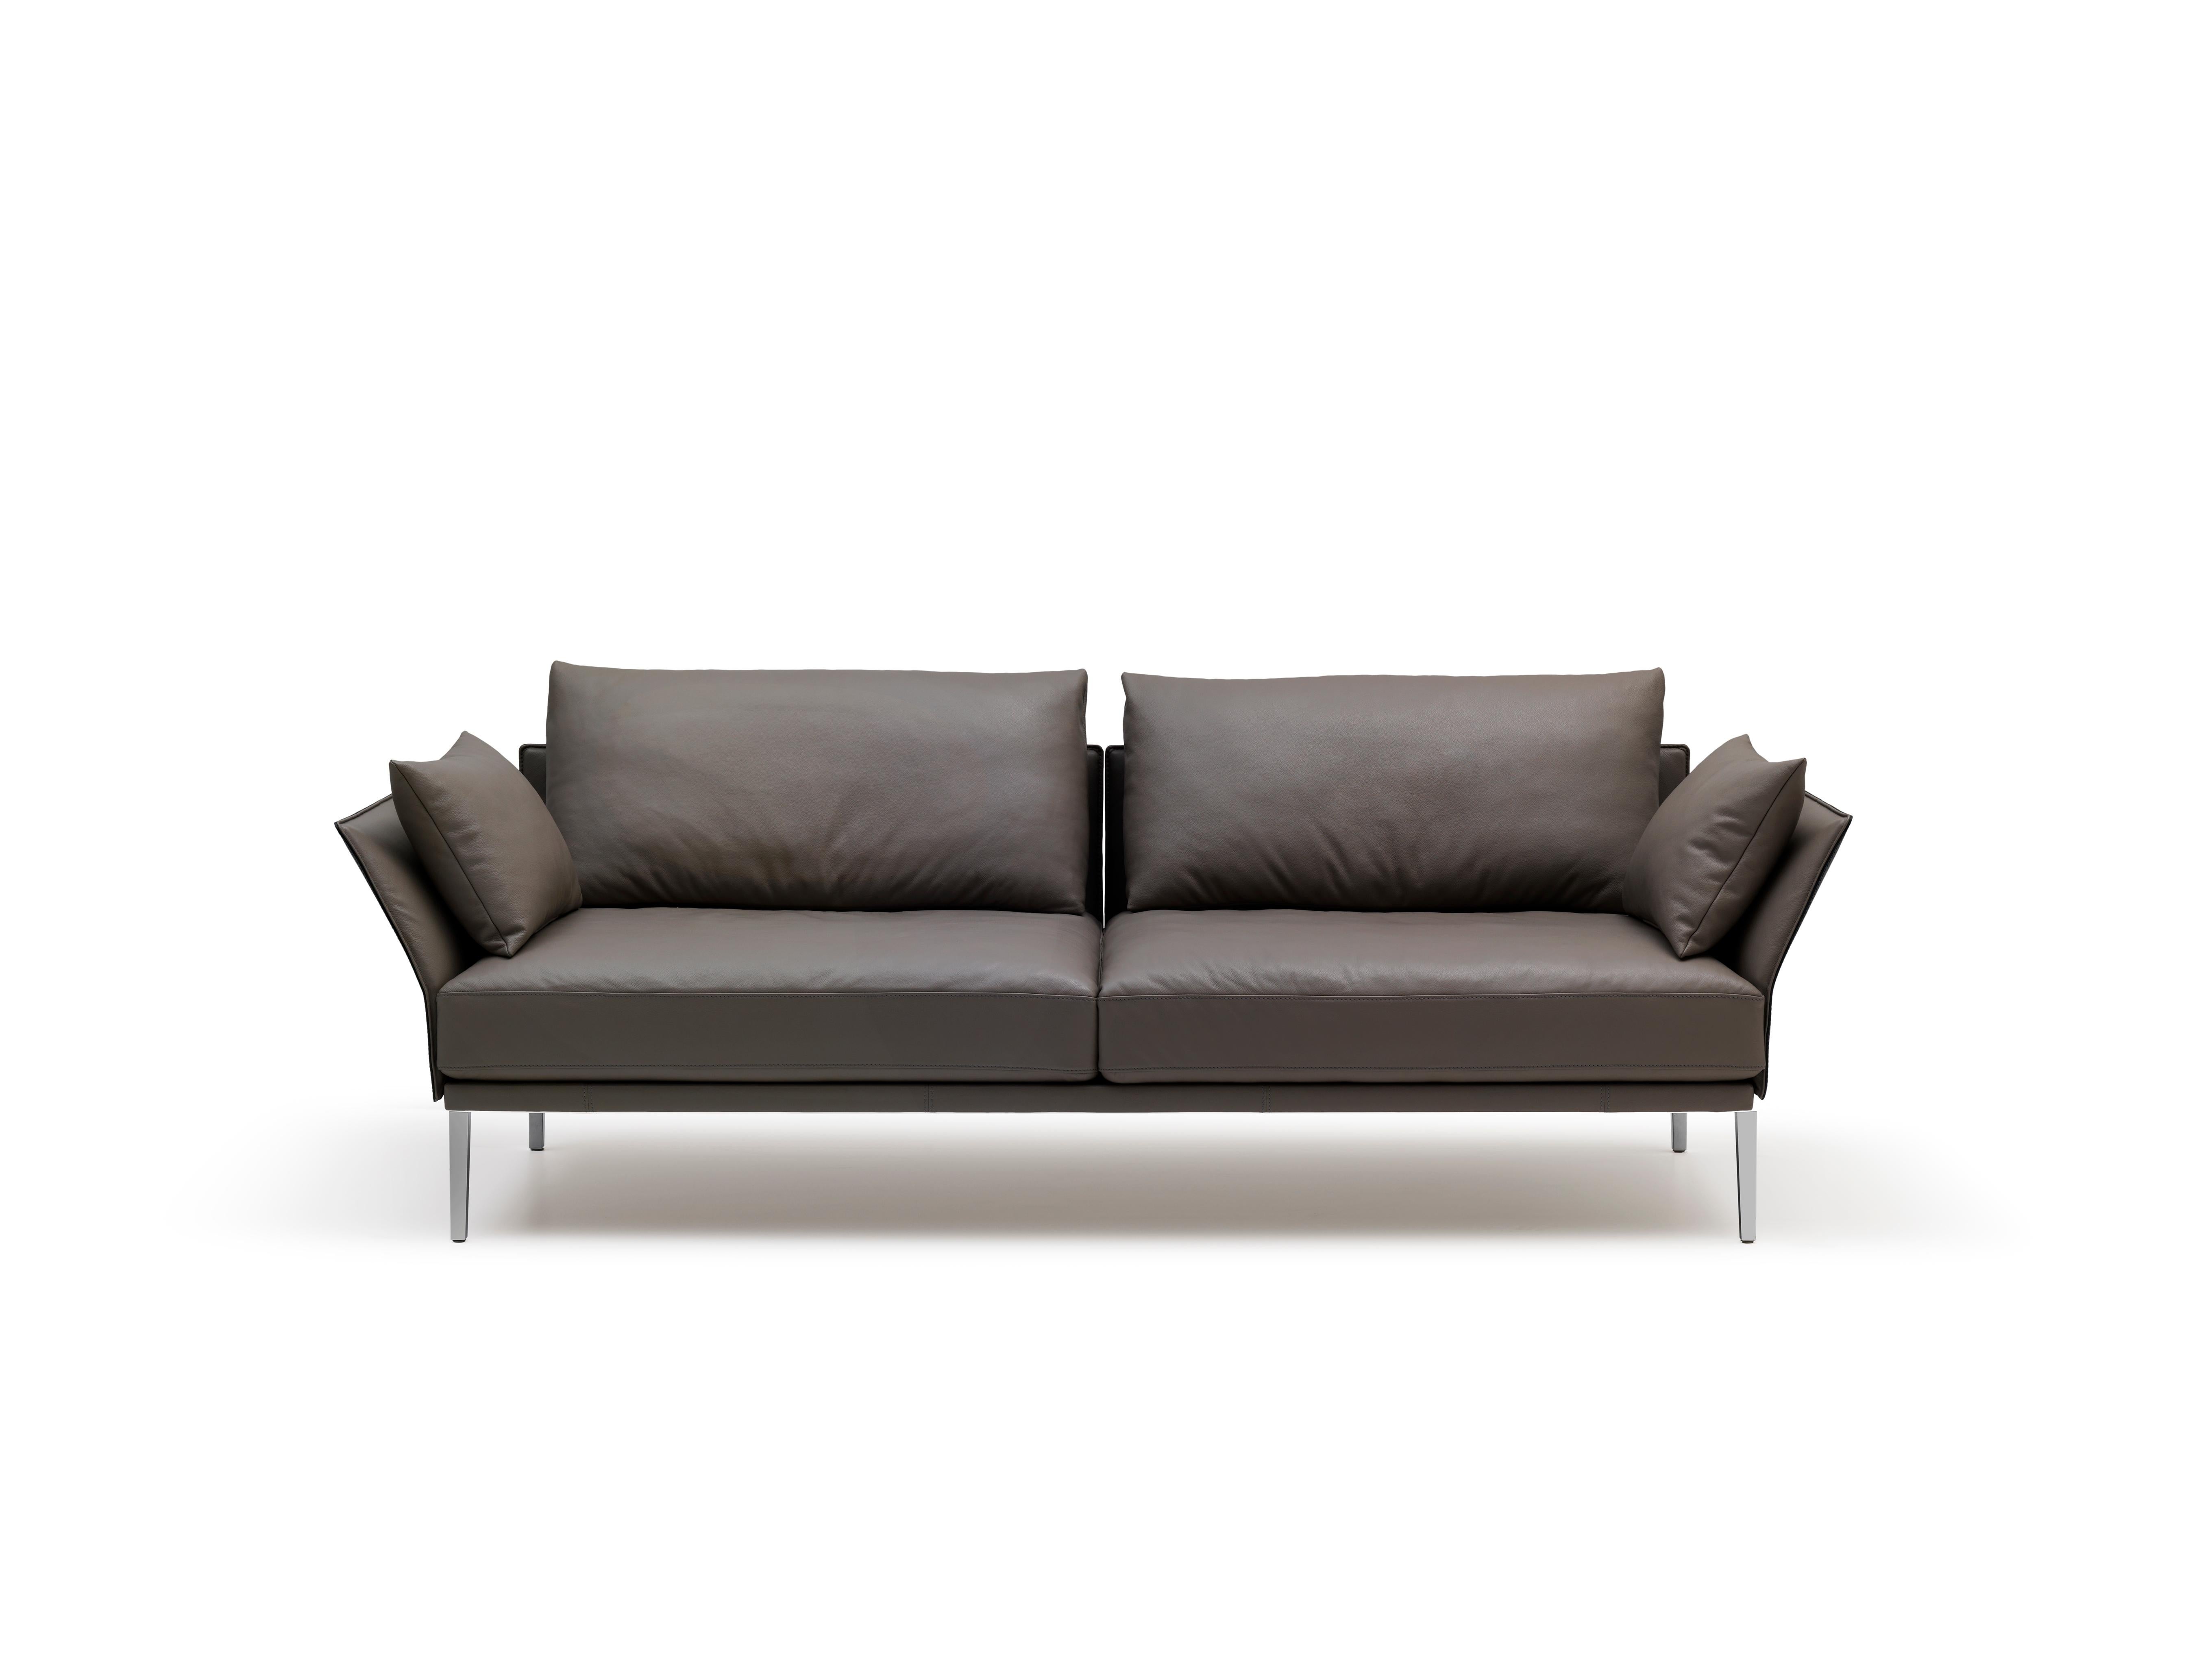 Set of DS-333 sofa and cushions by De Sede
Set of 4 cushions and 1 sofa
Design: Christian Werner
Dimensions: 
Sofa: D 58 x W 198 x H 78 cm
Backrest cushion/ armrest cushion: D 14/15 x W 50 x H 32 cm
Materials: aluminum, leather.

Prices may change